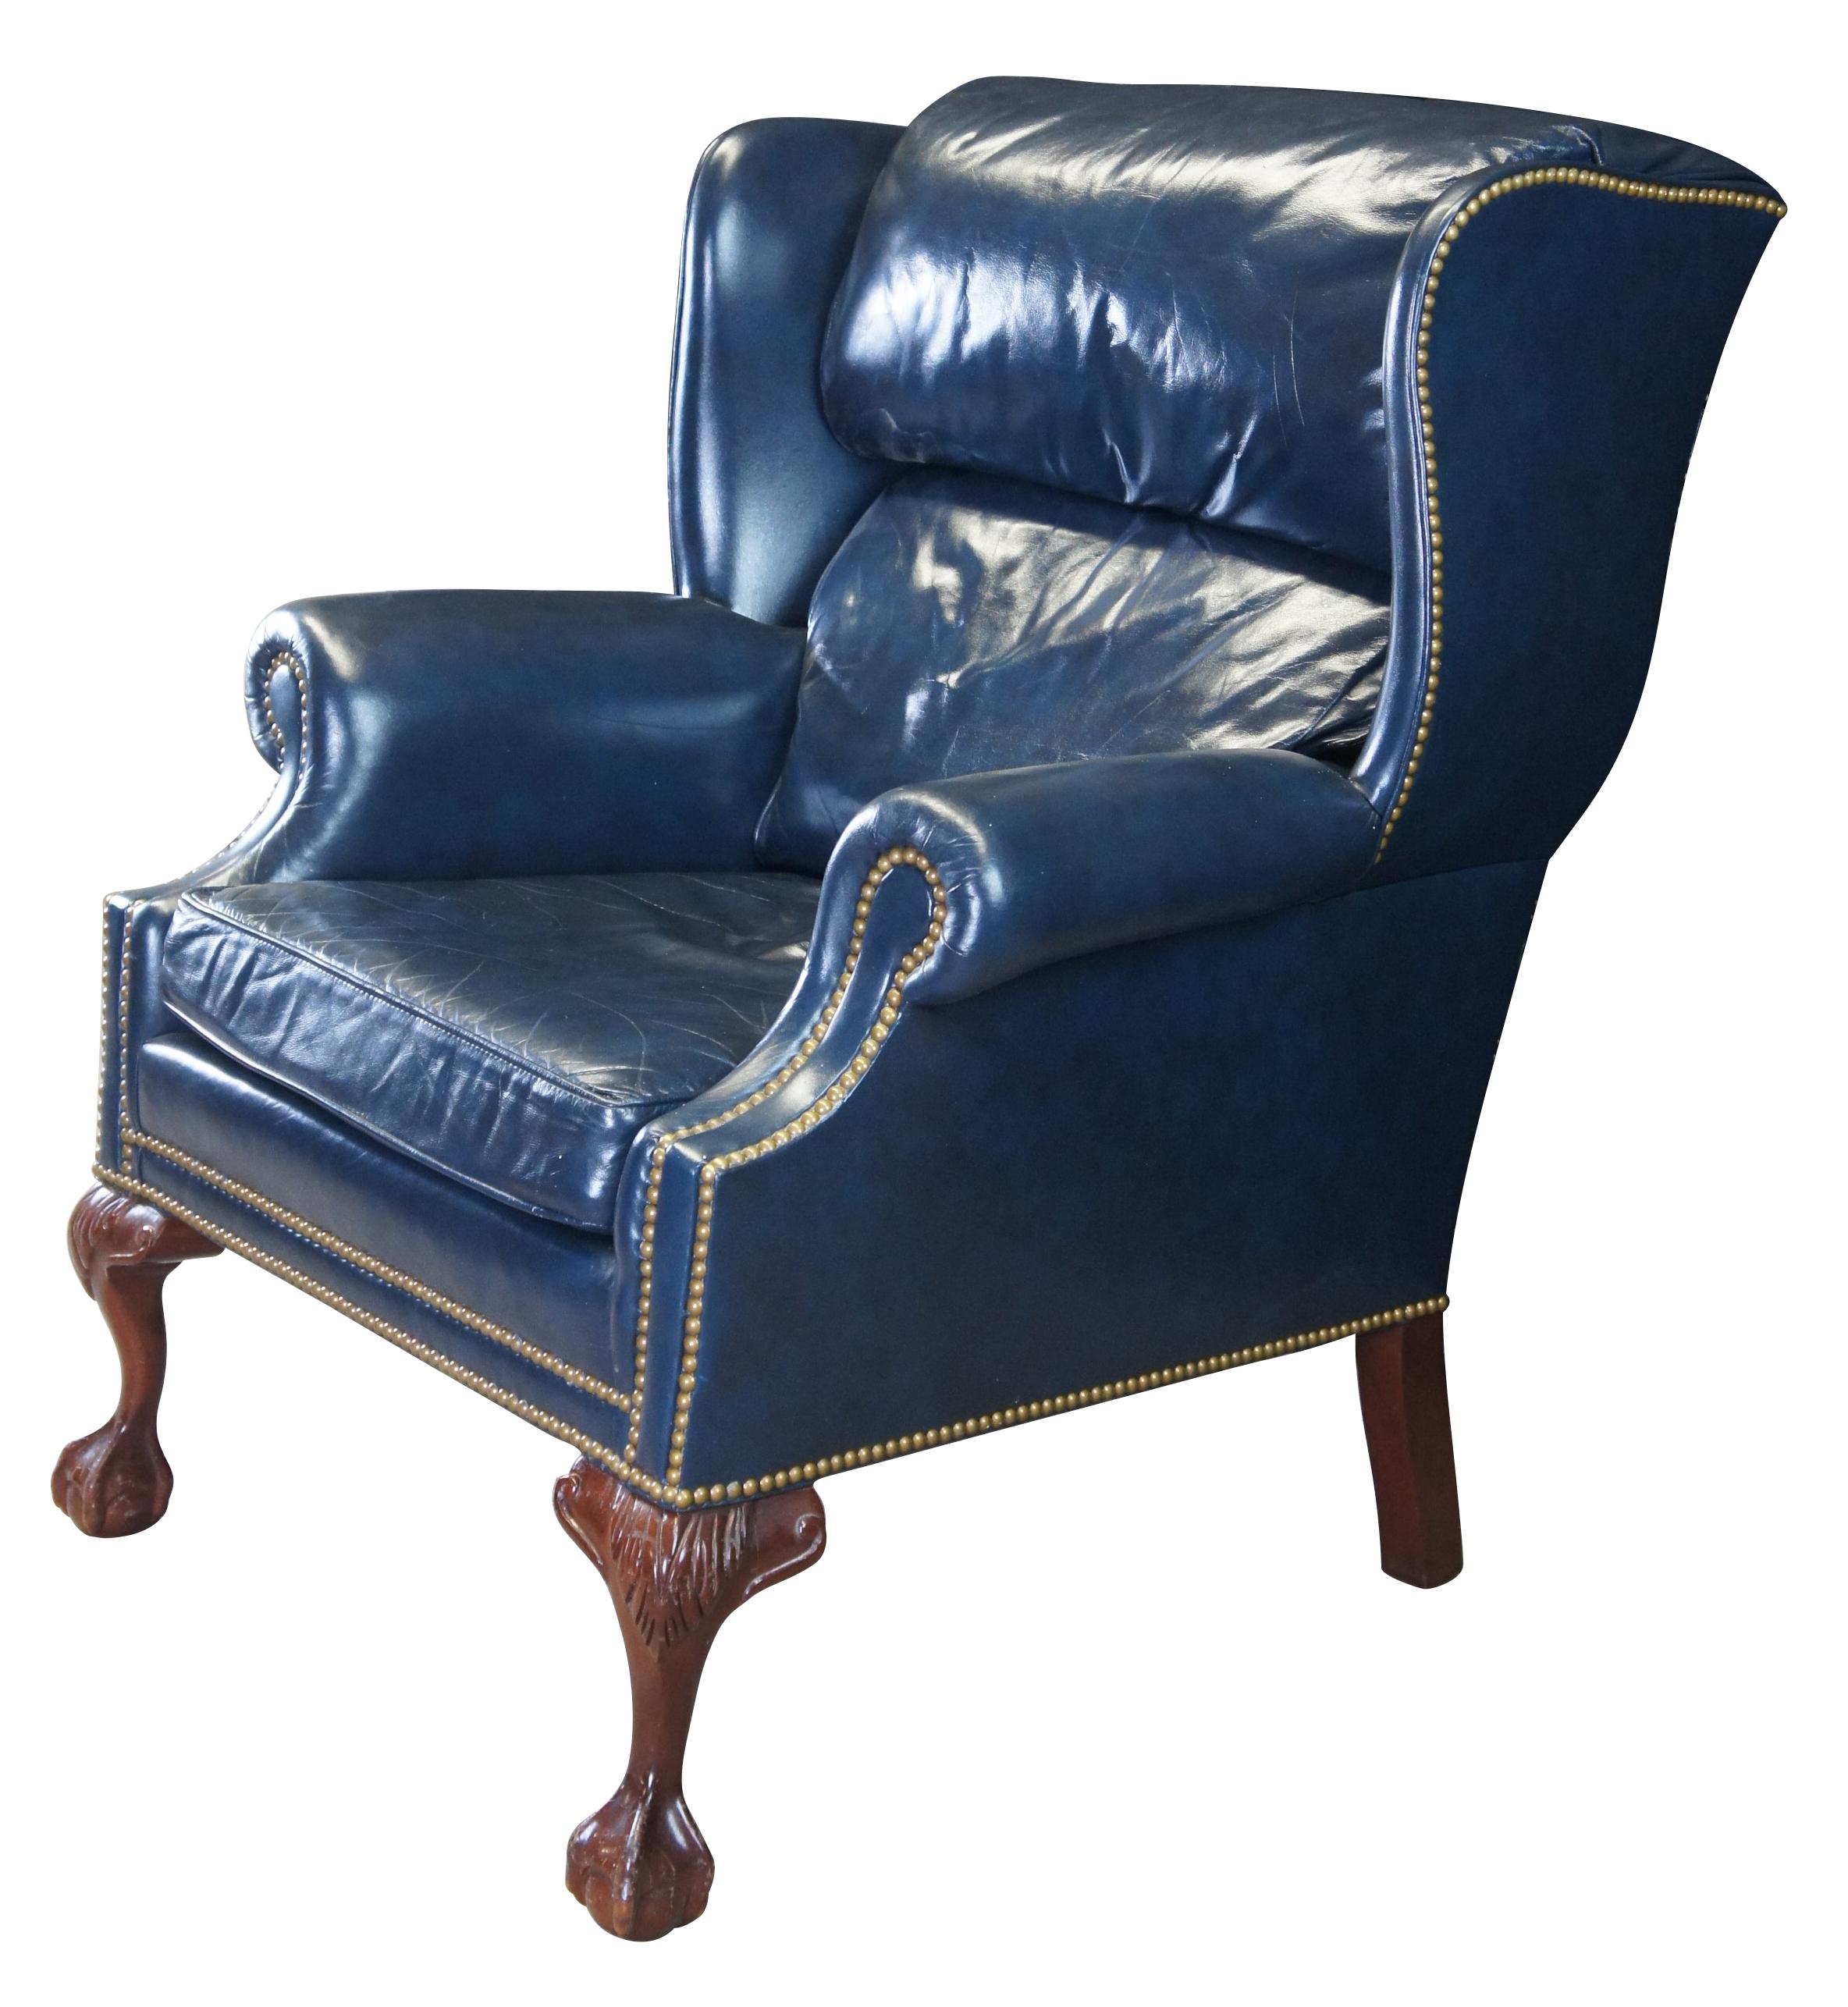 An eye catching wingback chair by Hancock & Moore, circa last quarter 20th century.  Inspired by classic English Georgian styling.  Features a hooded back with rolled arms and brass nail head trim.  The chair is supported by carved mahogany ball and